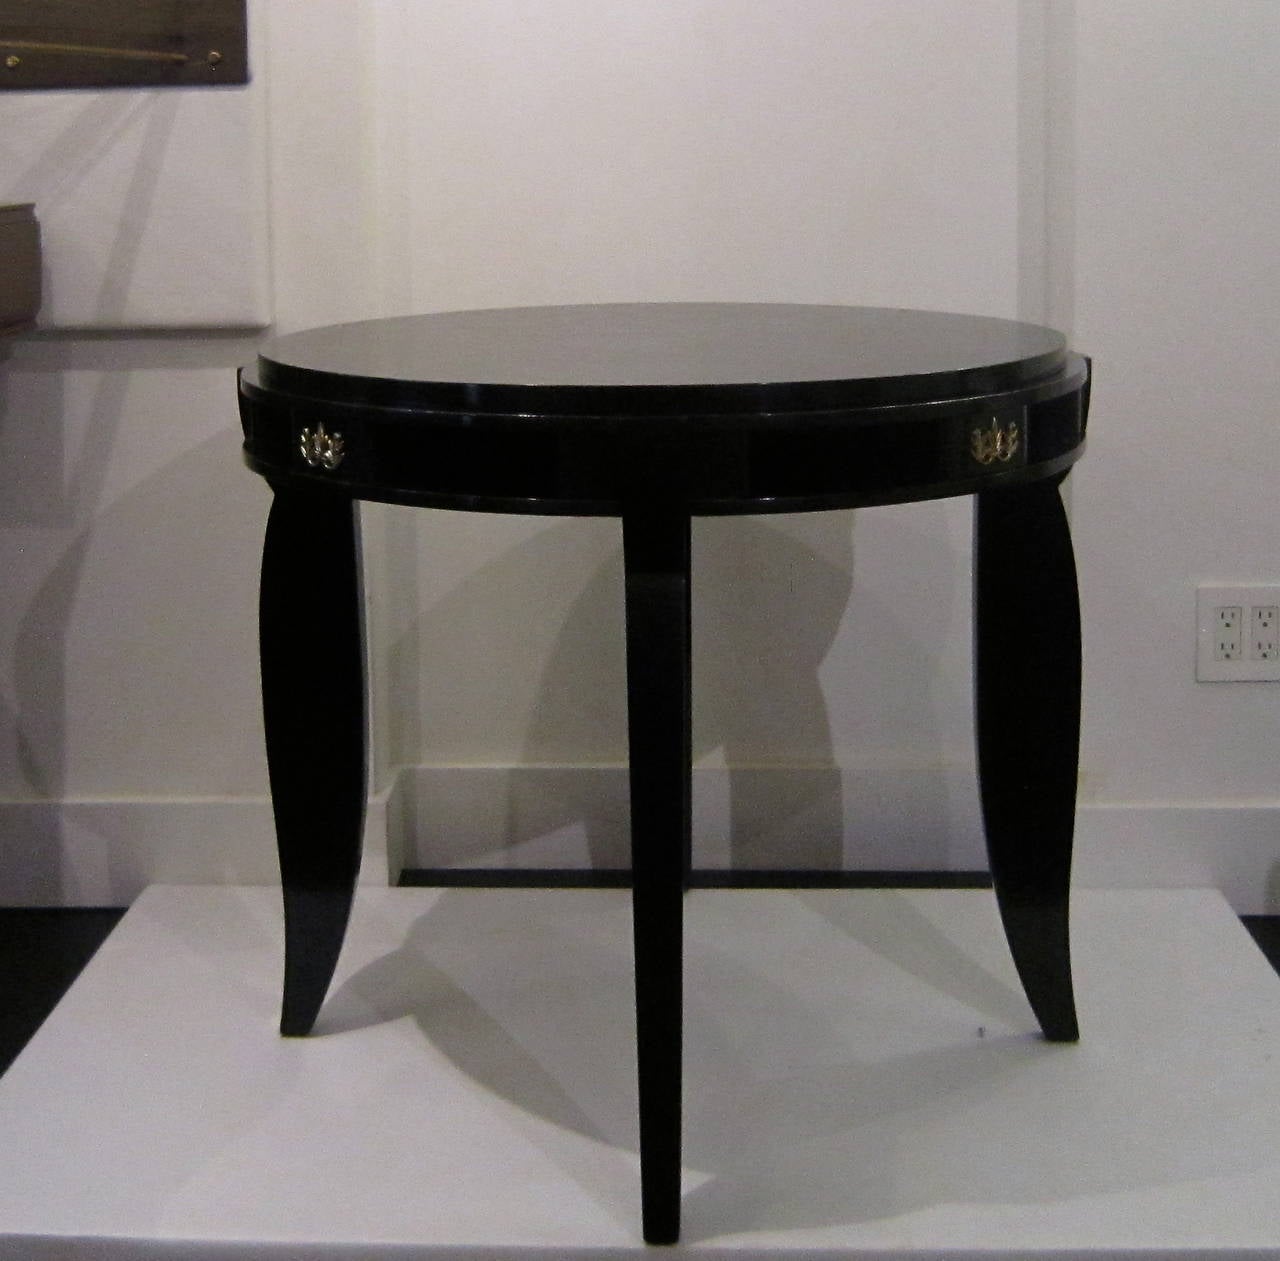 Ebony lacquered game table in the style of Jules Leleu. Designed with compartments for game accessories etc. with elegant curved legs. Beautiful detailing with bronze accents.